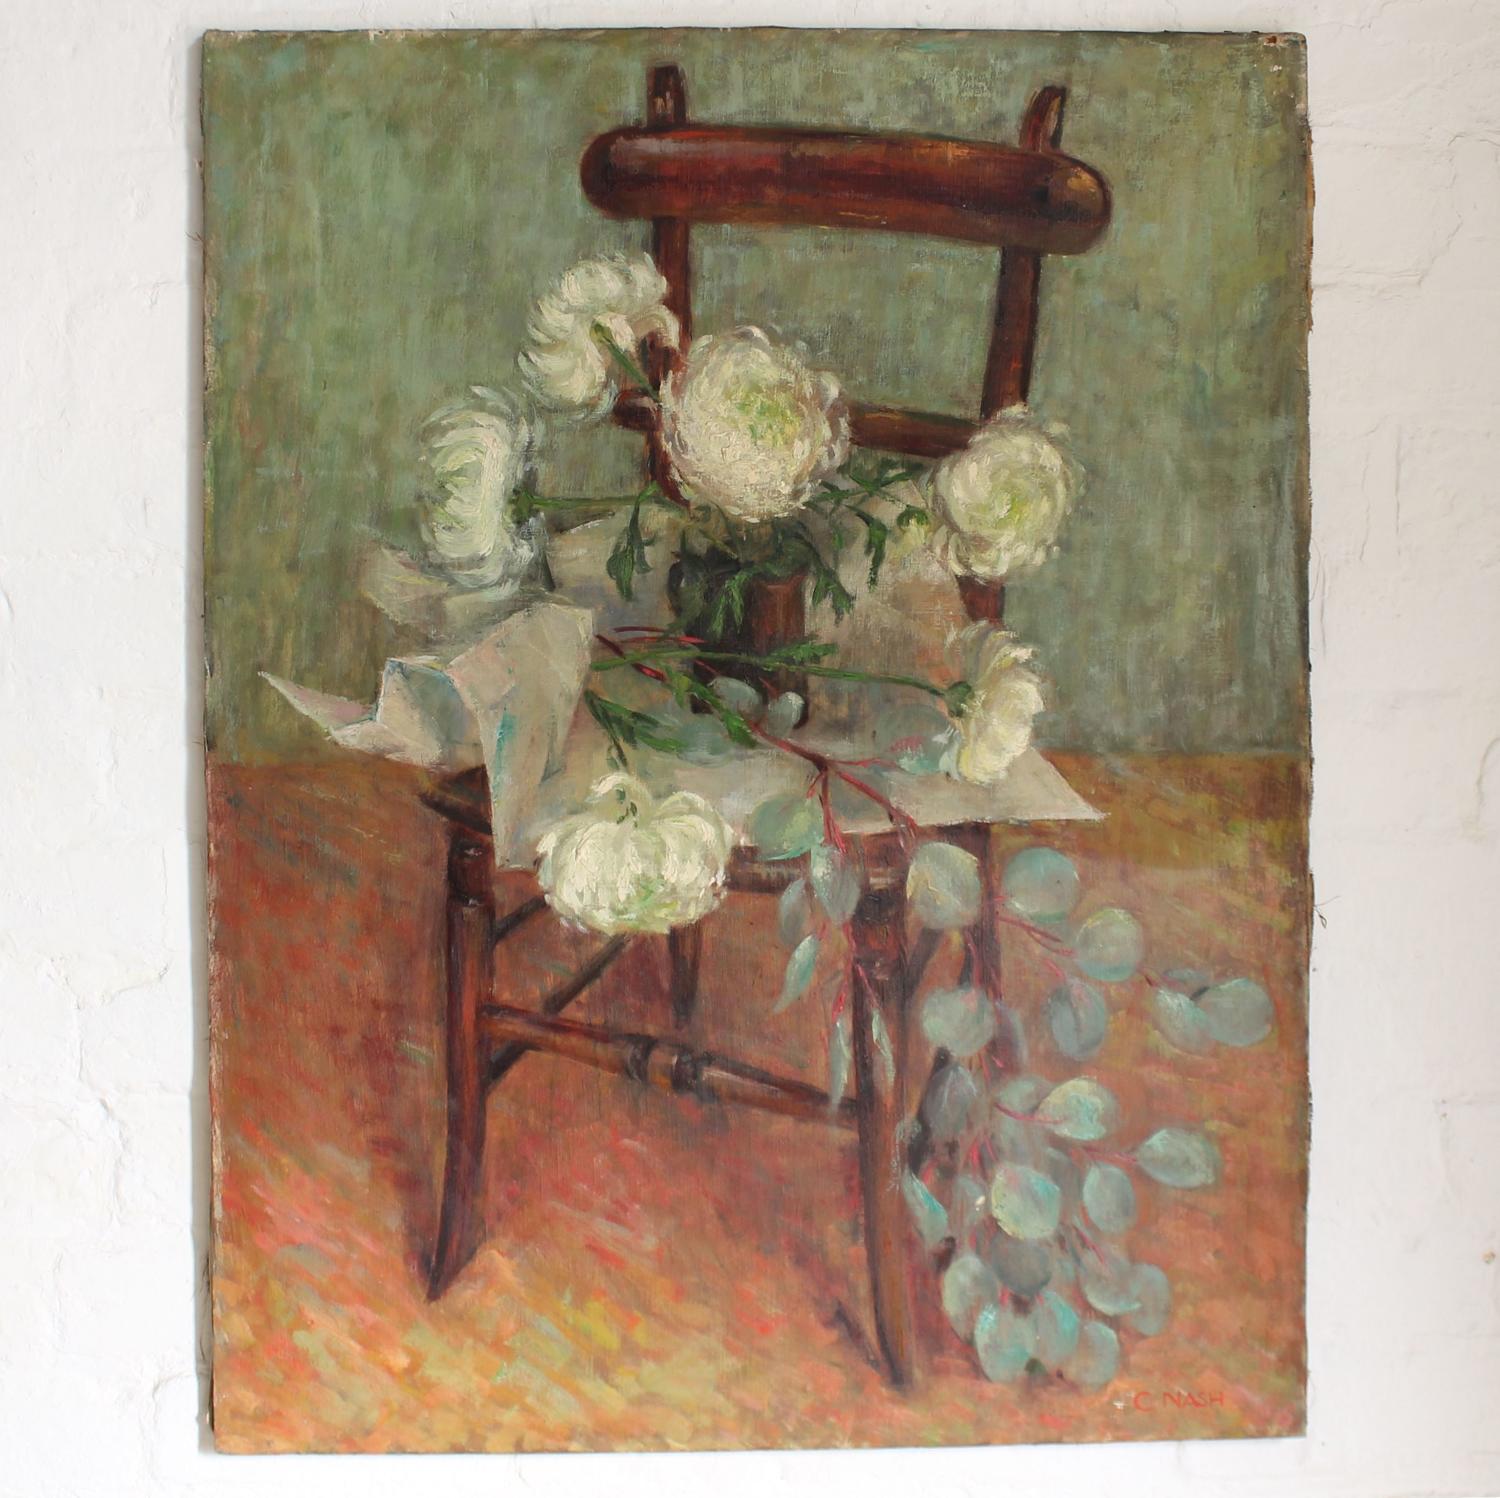 Chair with Flowers